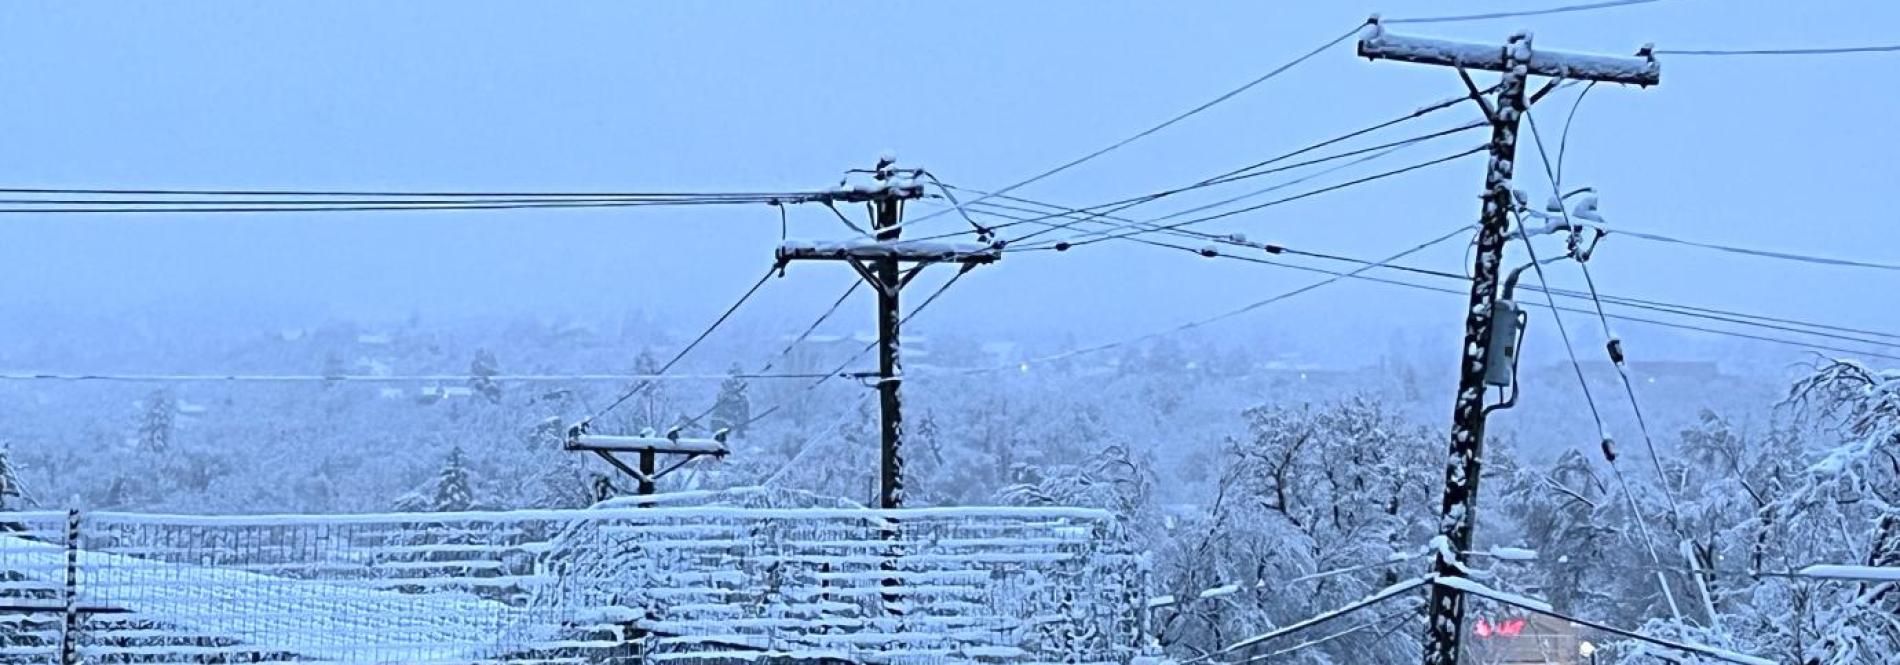 LPEA expects to see widespread outages due to weather today